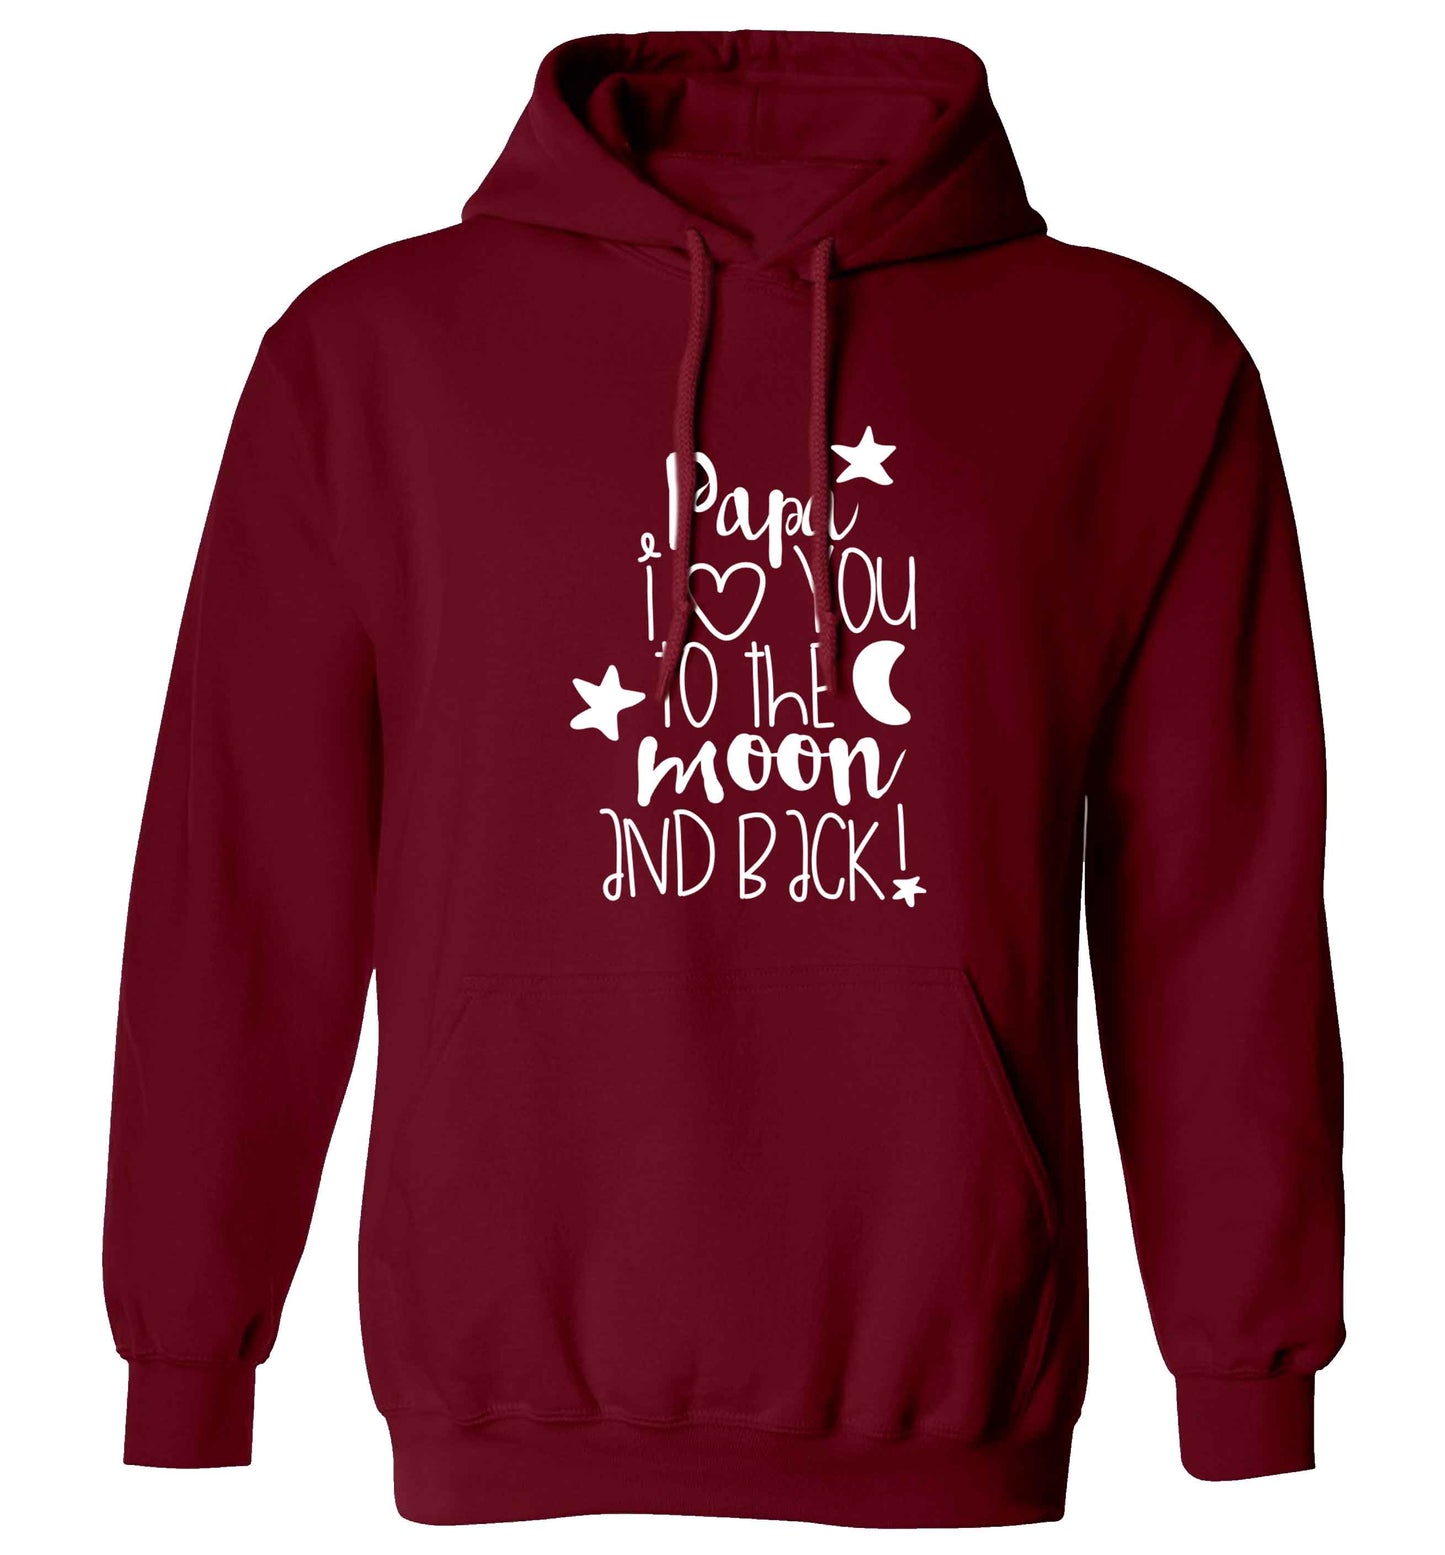 Papa I love you to the moon and back adults unisex maroon hoodie 2XL